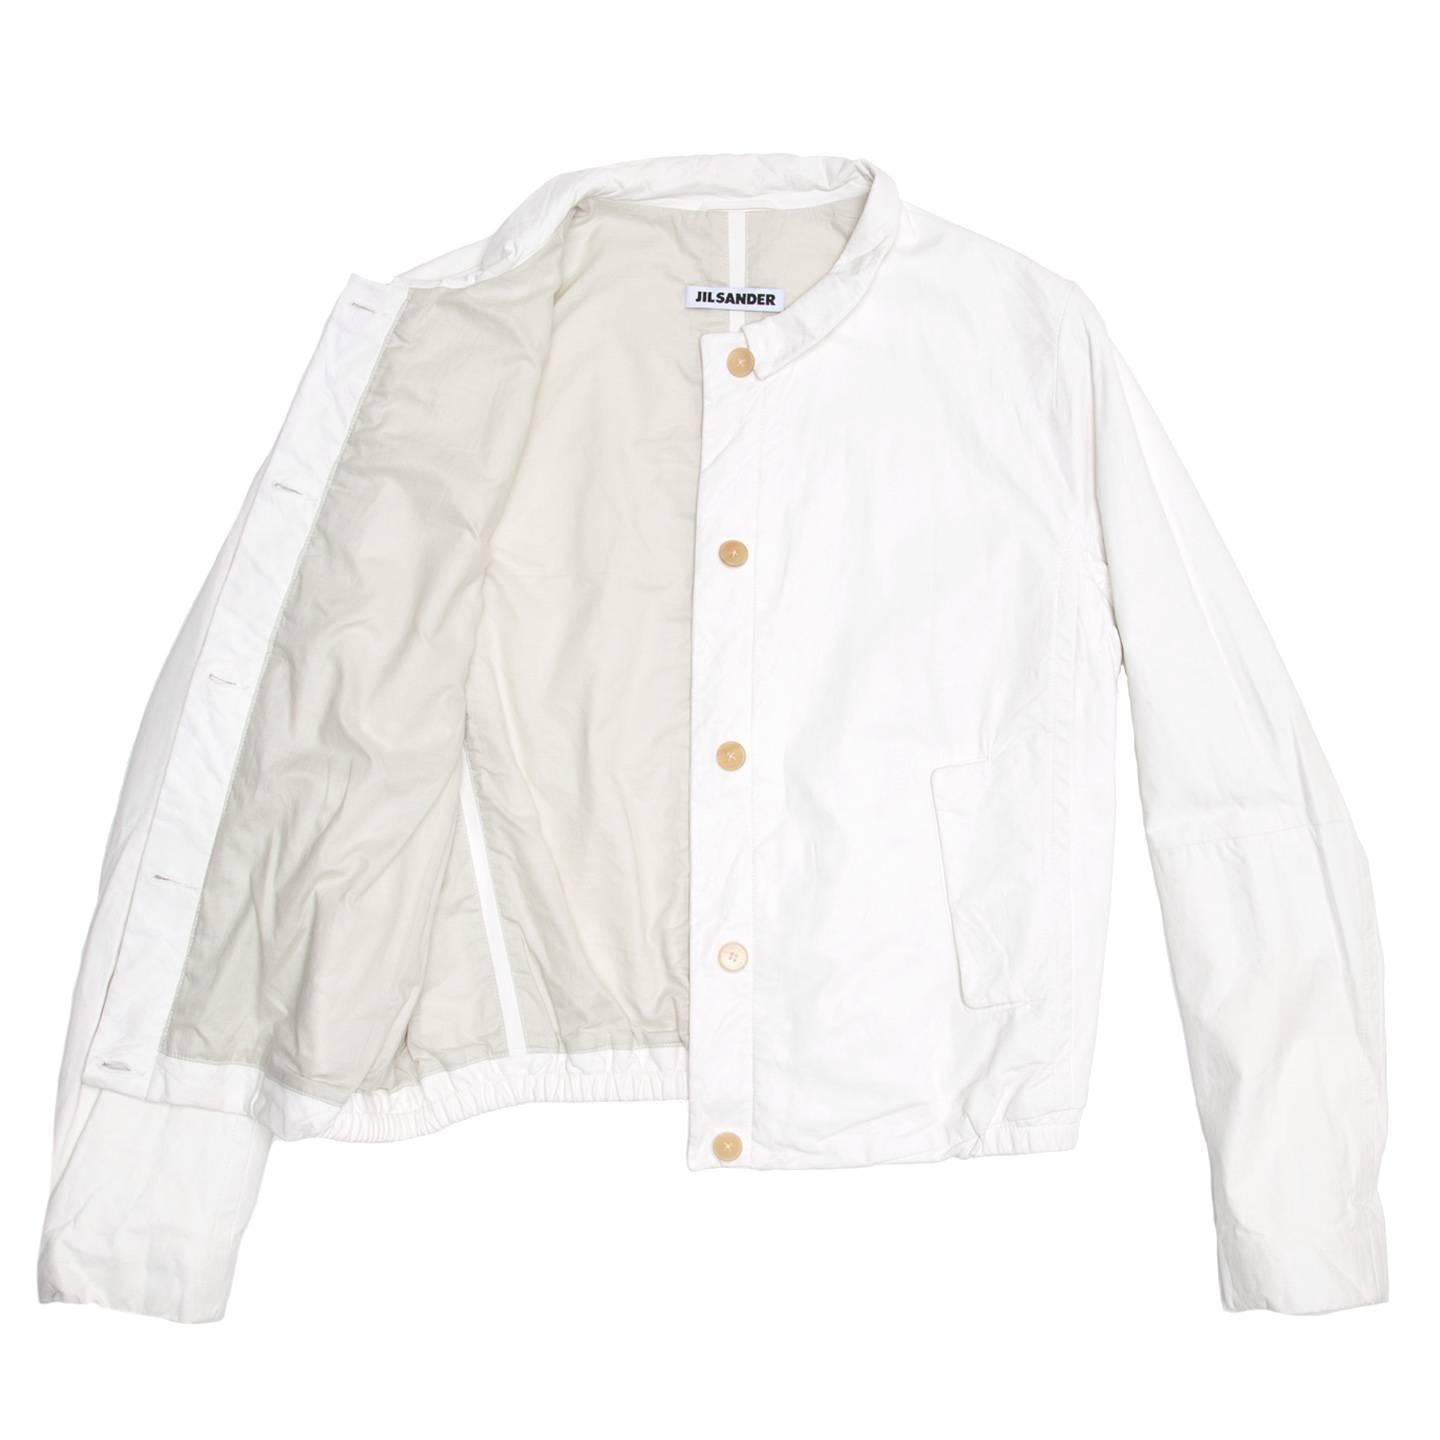 Jil Sander White Leather Bomber Jacket In New Condition For Sale In Brooklyn, NY